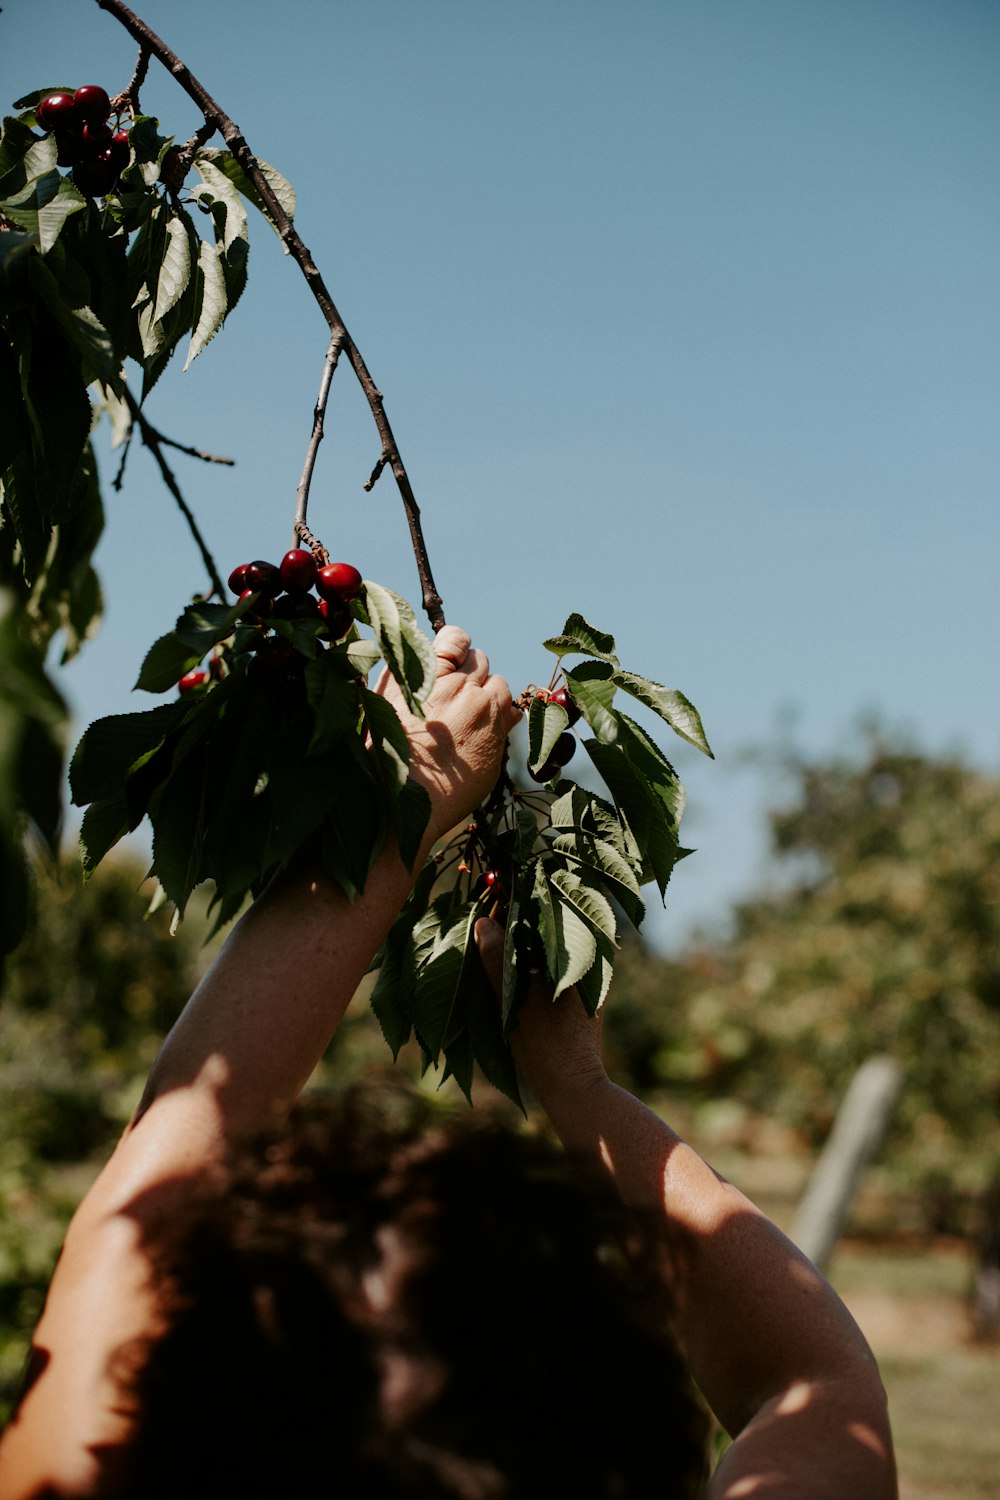 a person reaching up to pick berries from a tree